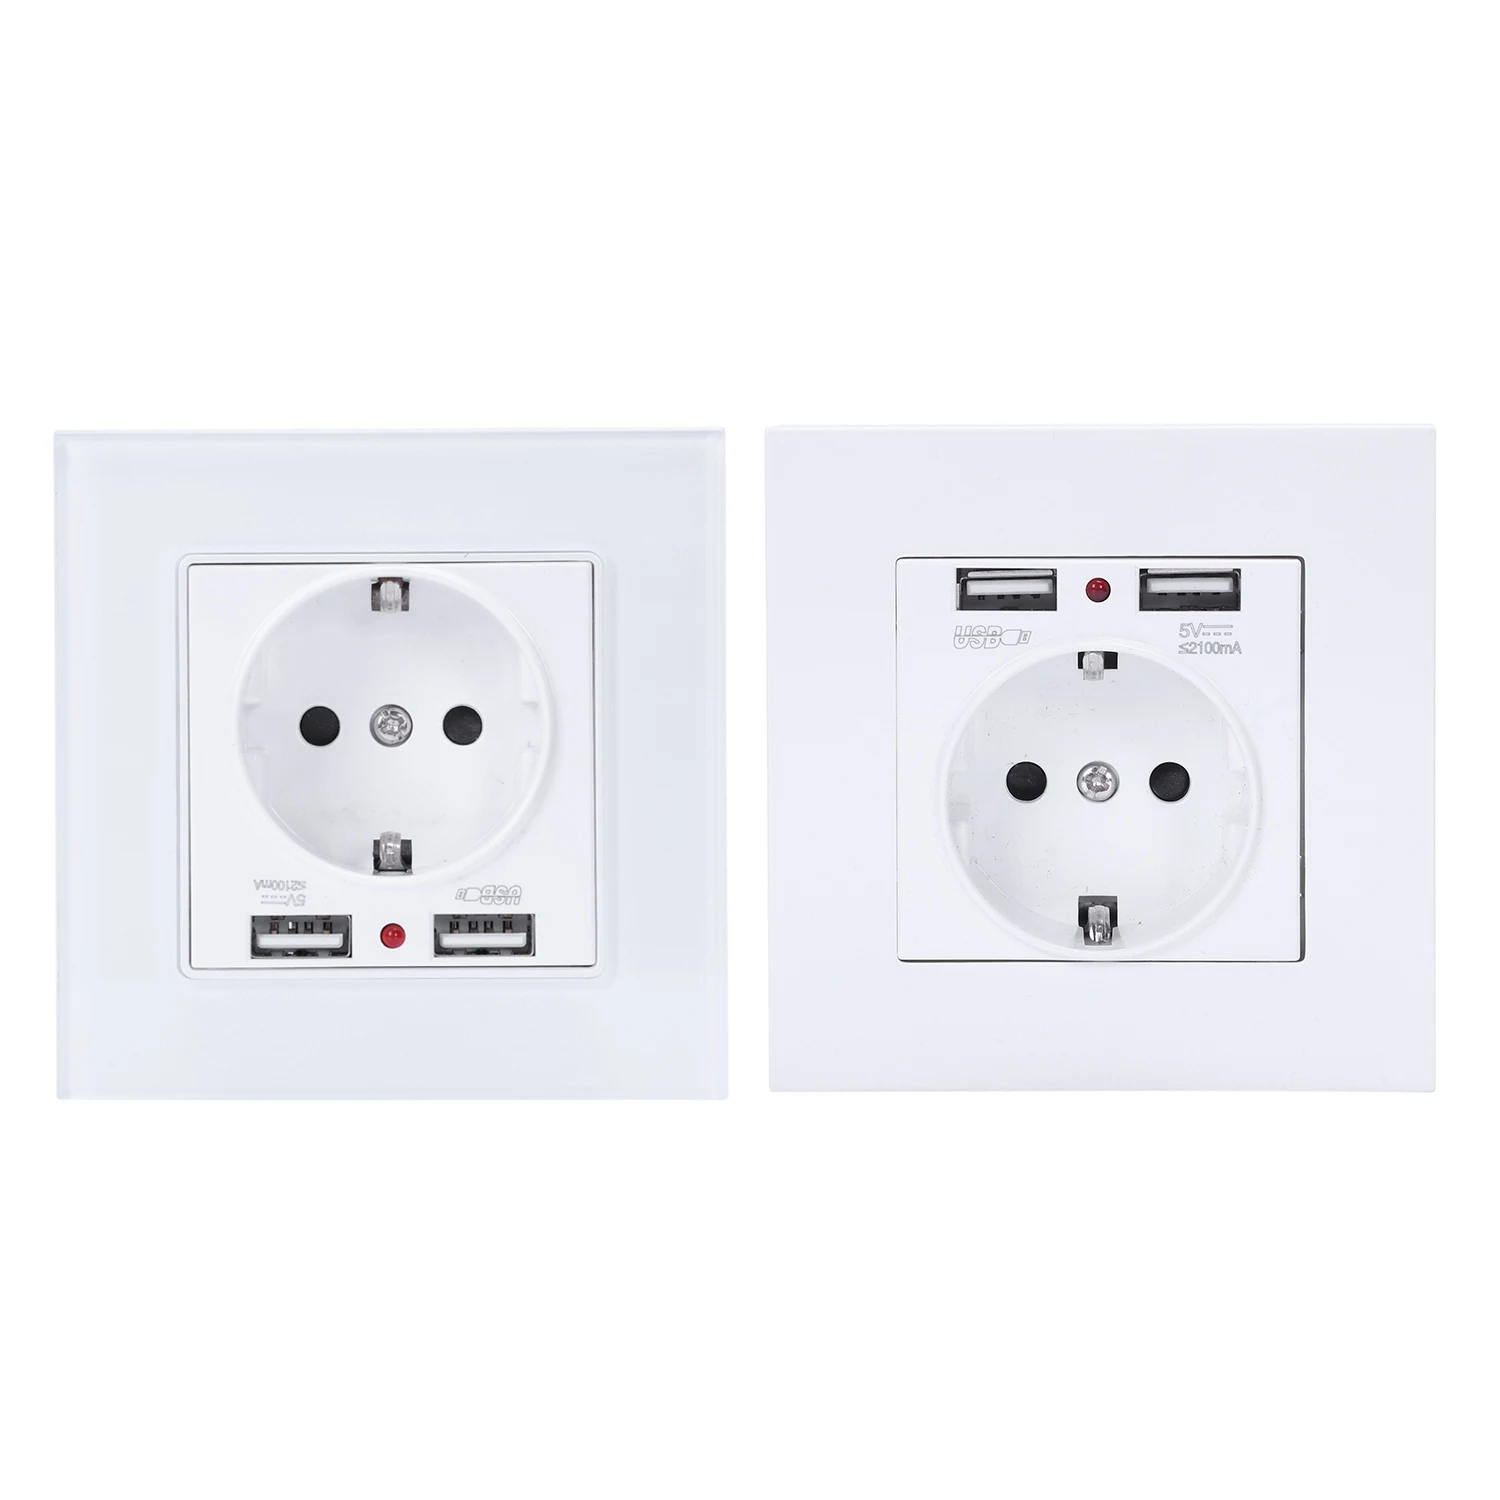 

Panel Wall Power Socket Grounded 16A Eu Standard Electrical Outlet With 2100Ma Dual Usb Charger Port For Mobile